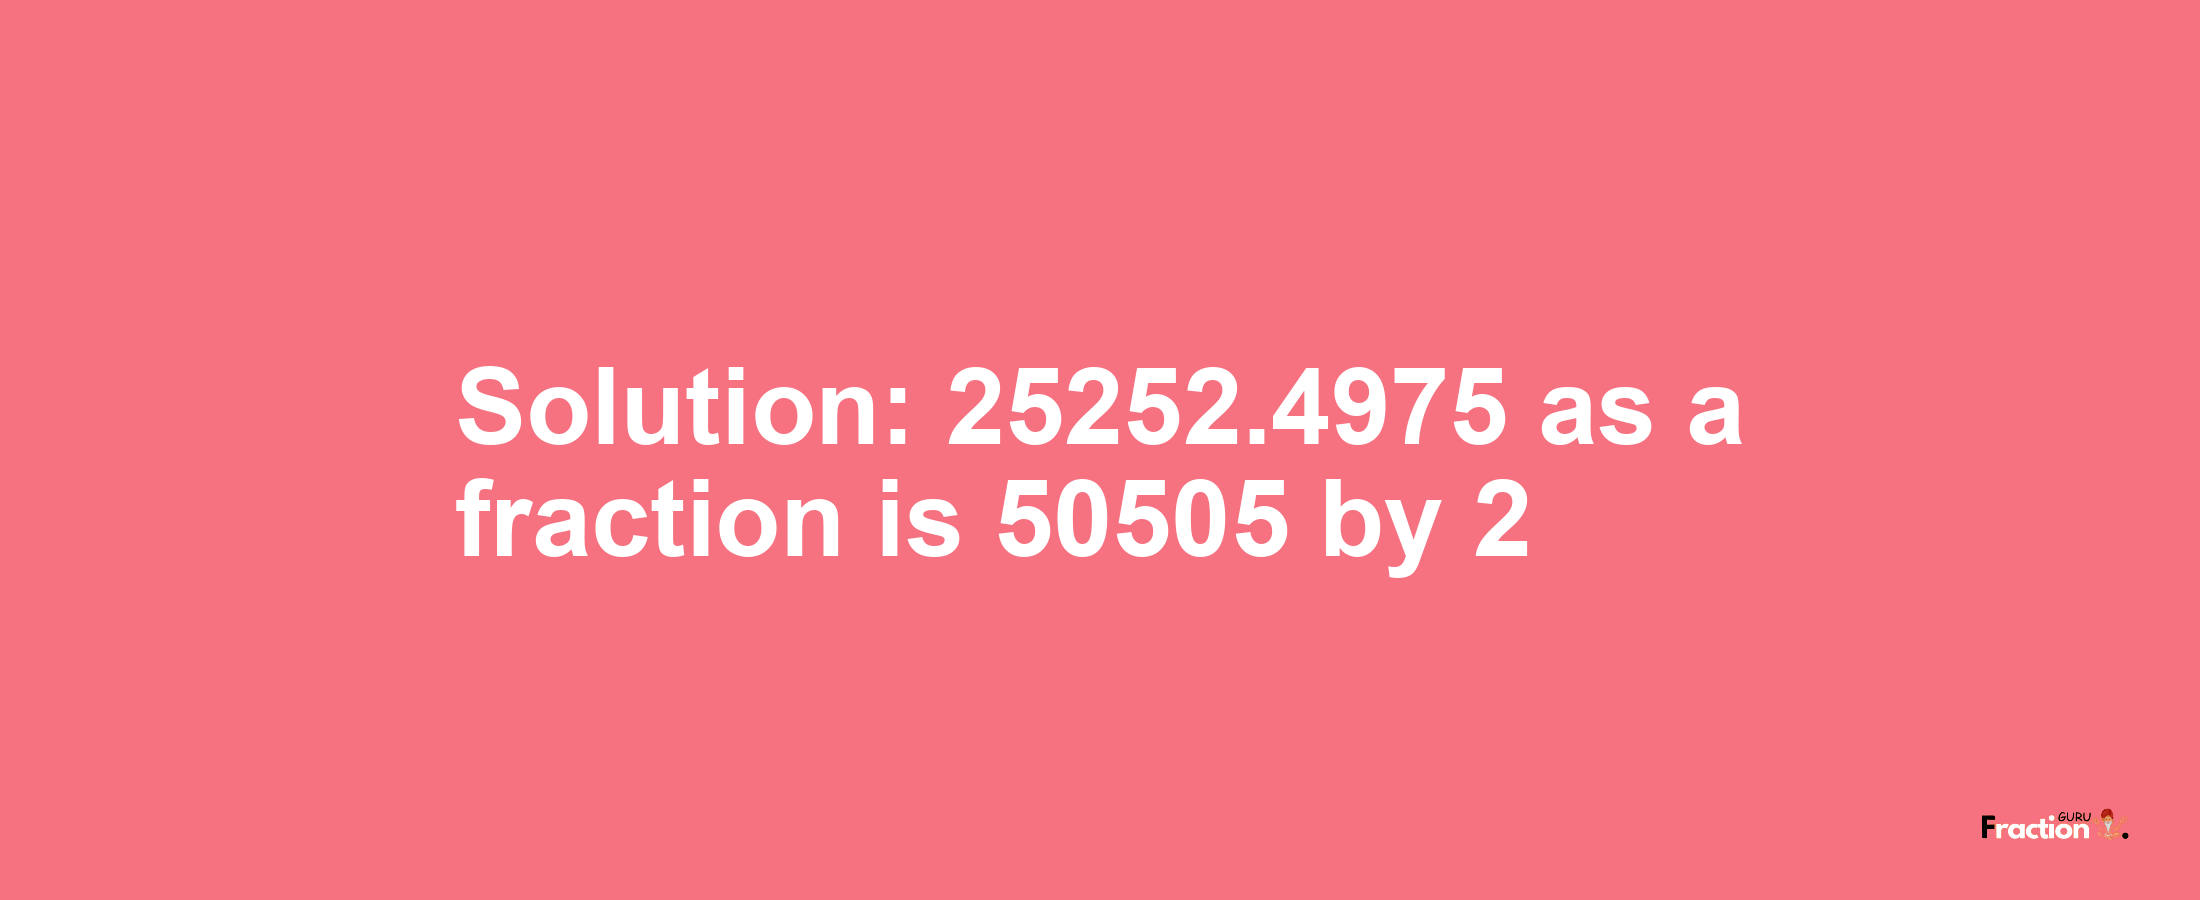 Solution:25252.4975 as a fraction is 50505/2